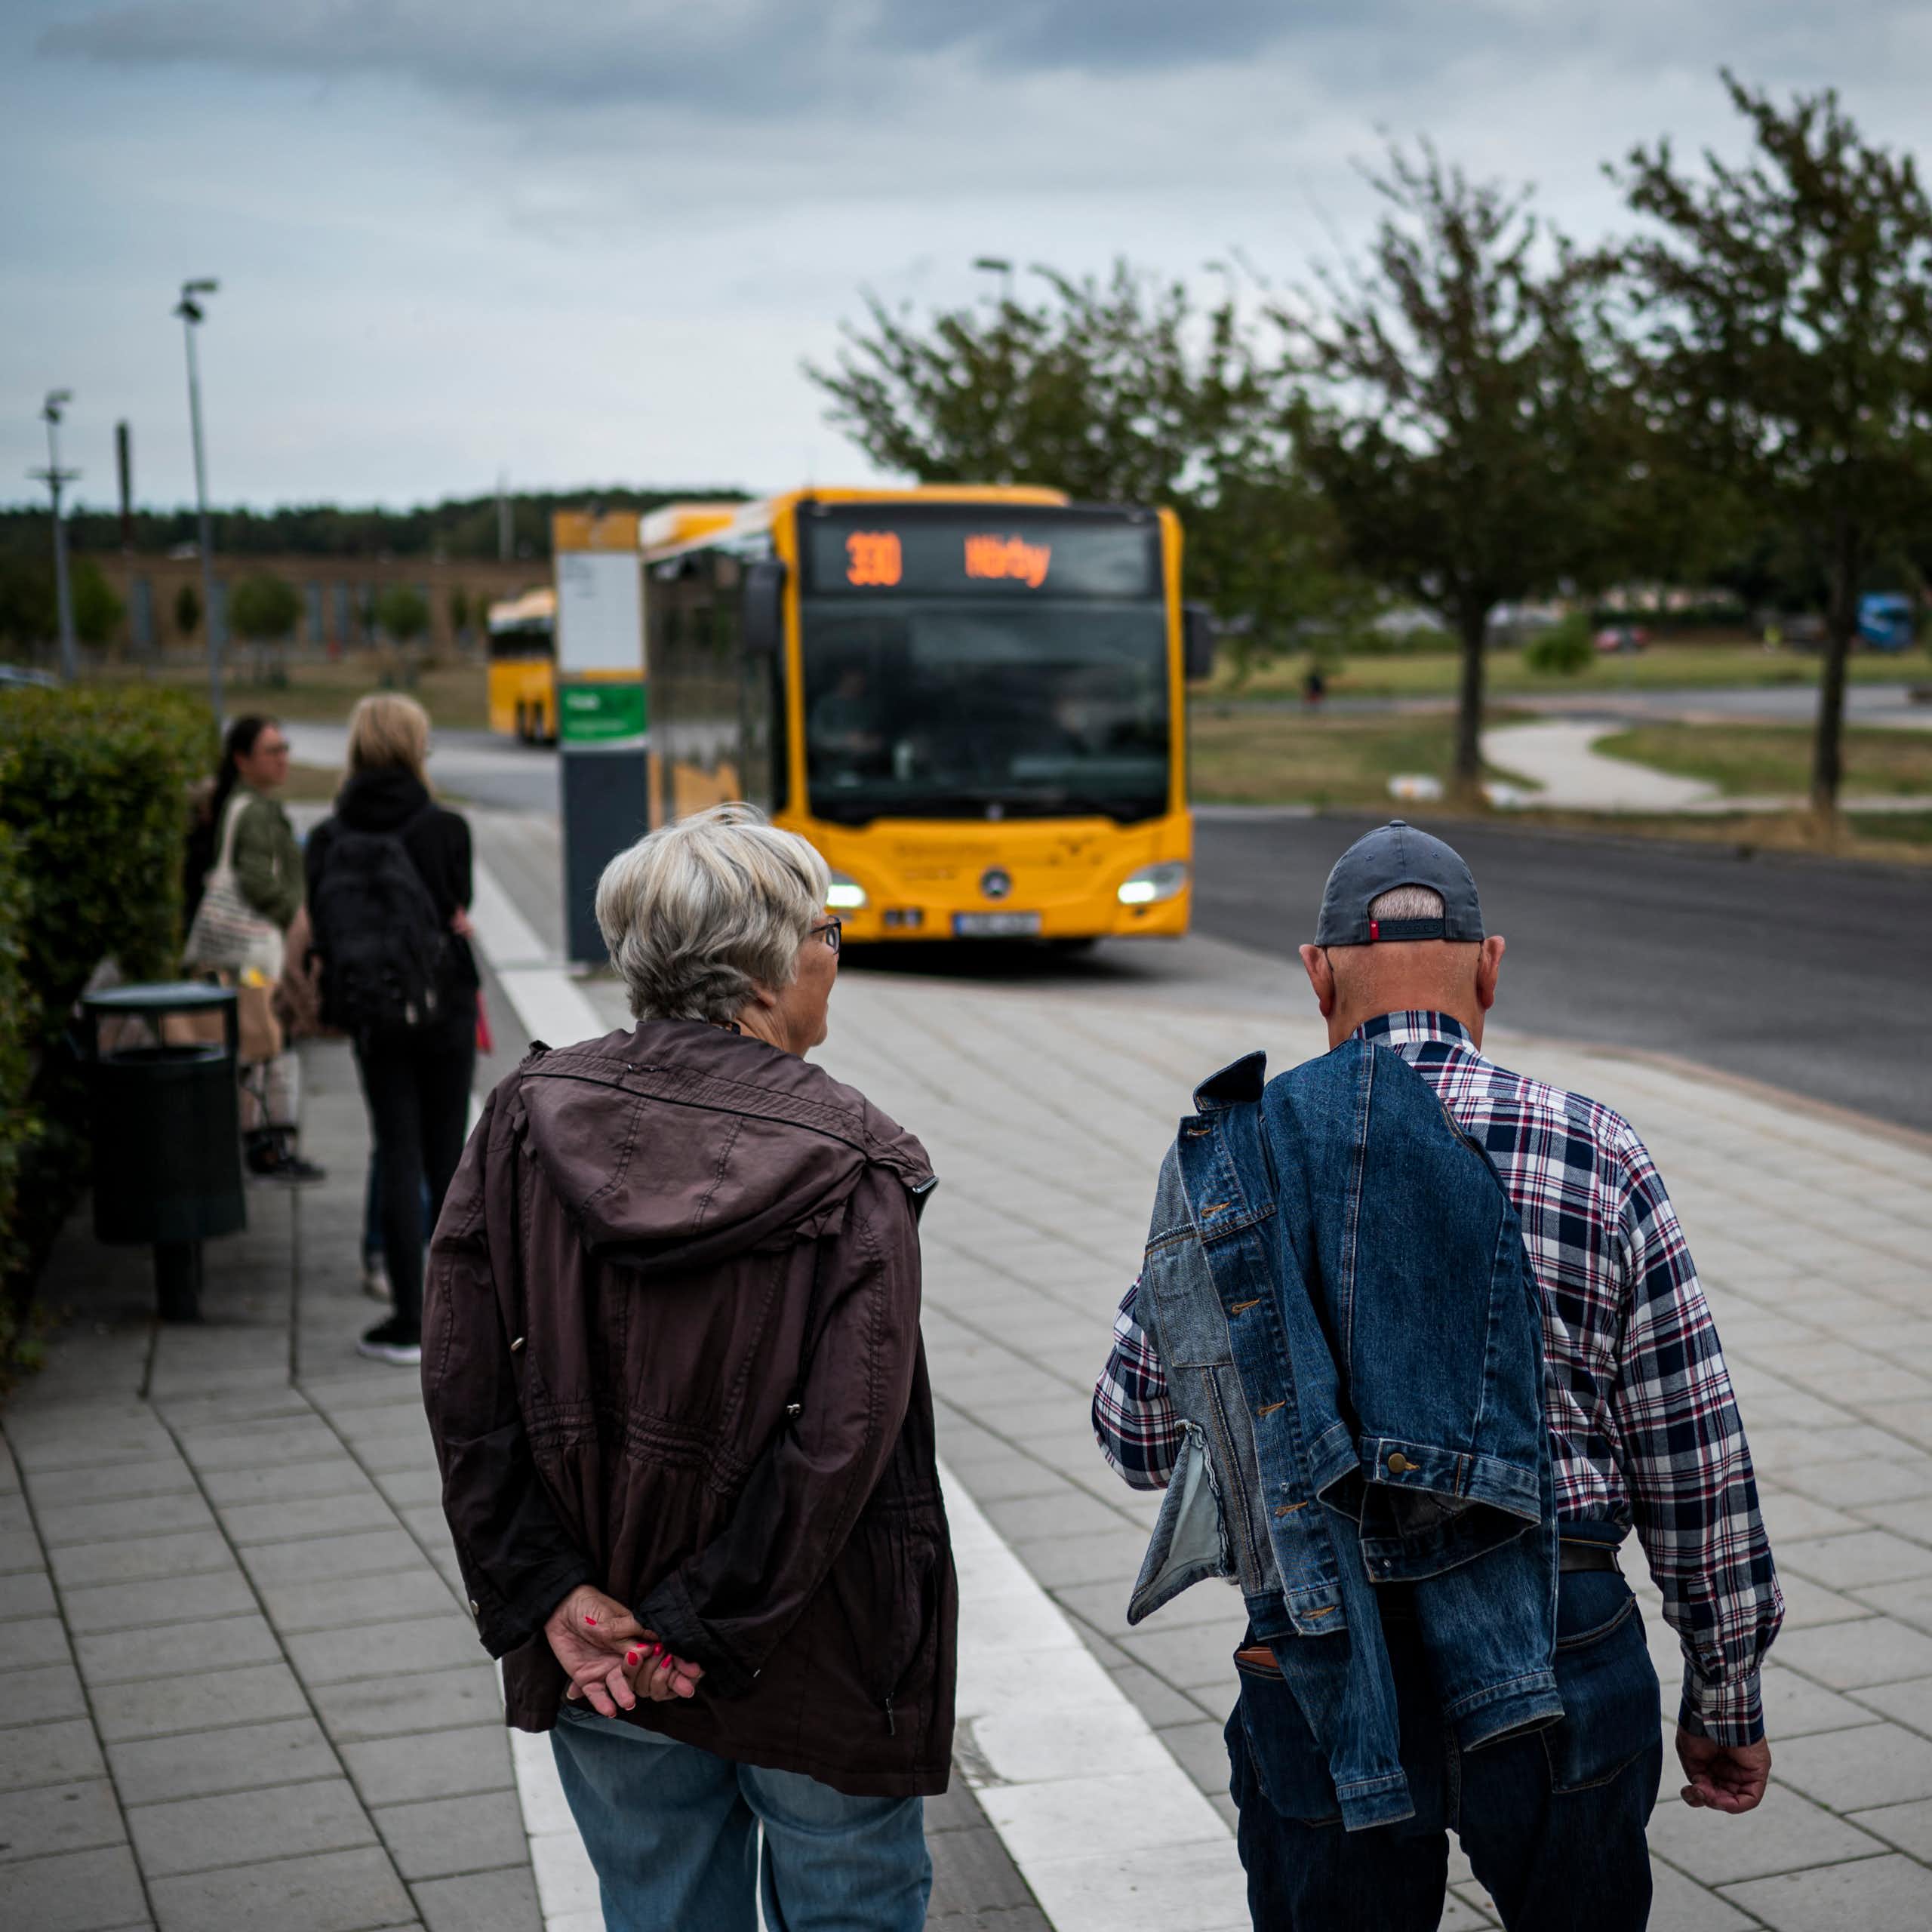 Two older people stand on the street as a bus approaches.